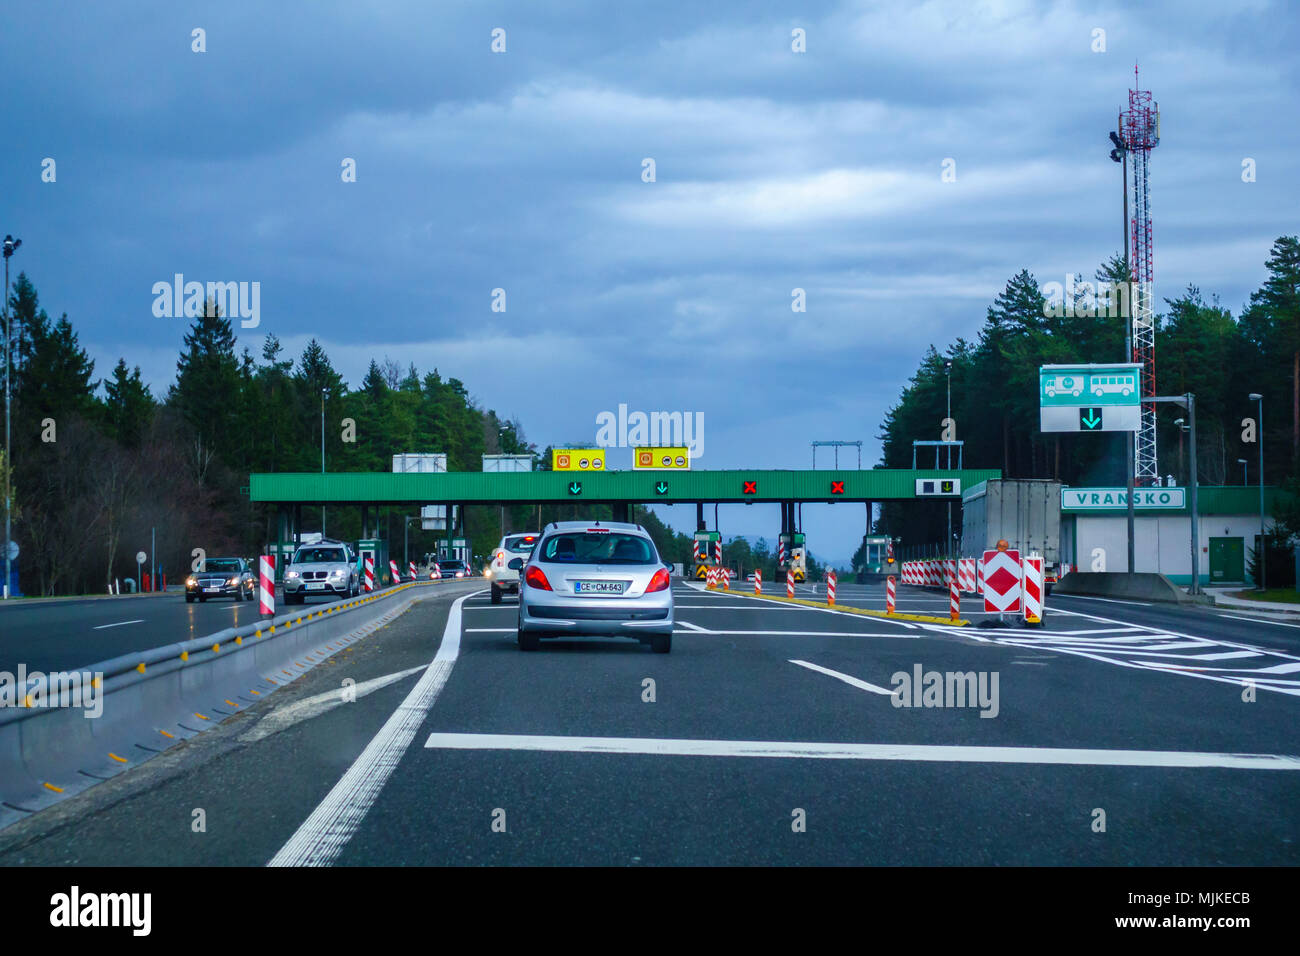 Toll station Vransko on the A1 highway in Slovenia Stock Photo